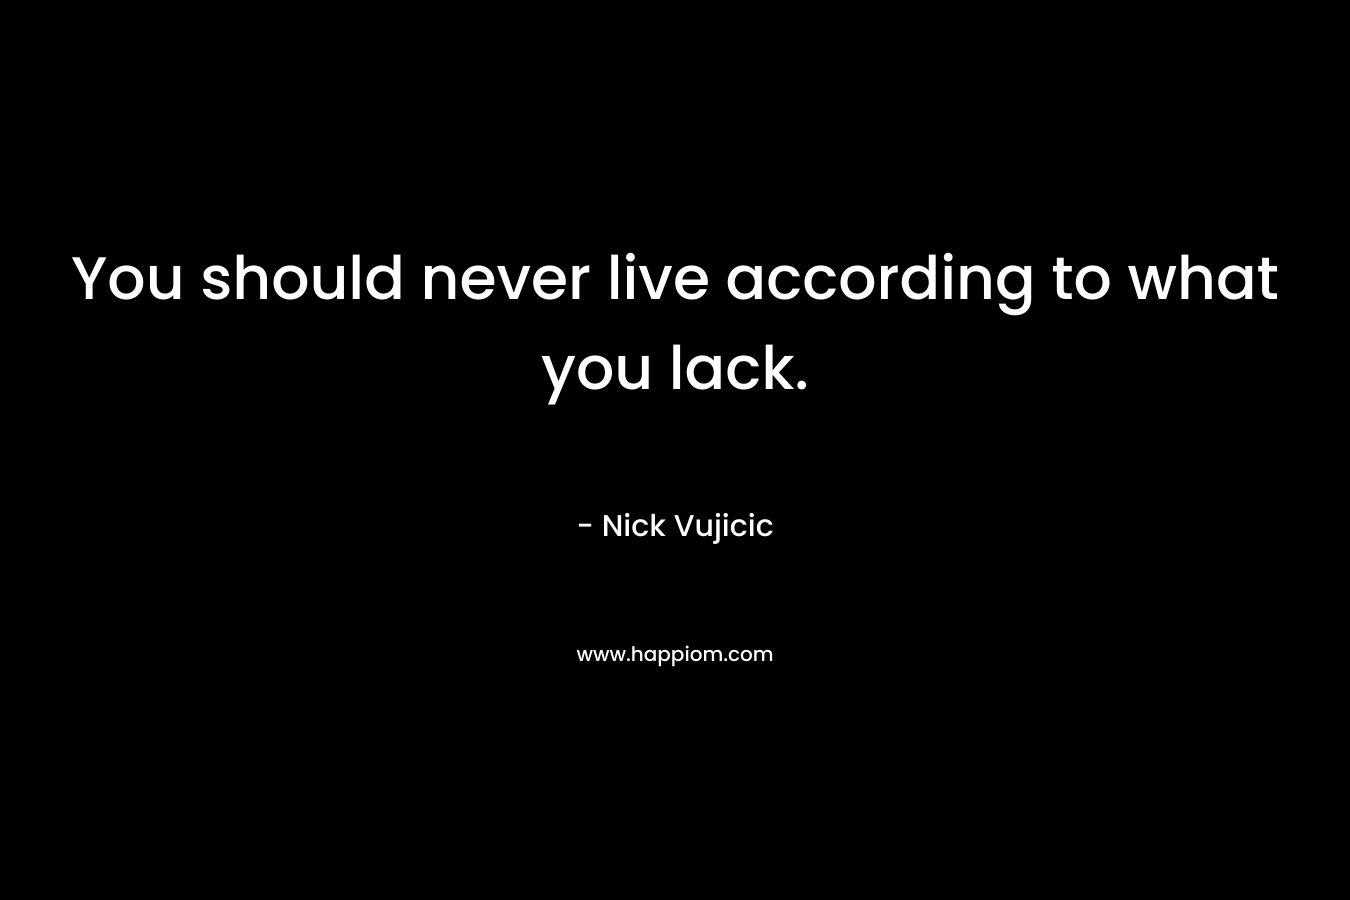 You should never live according to what you lack. – Nick Vujicic